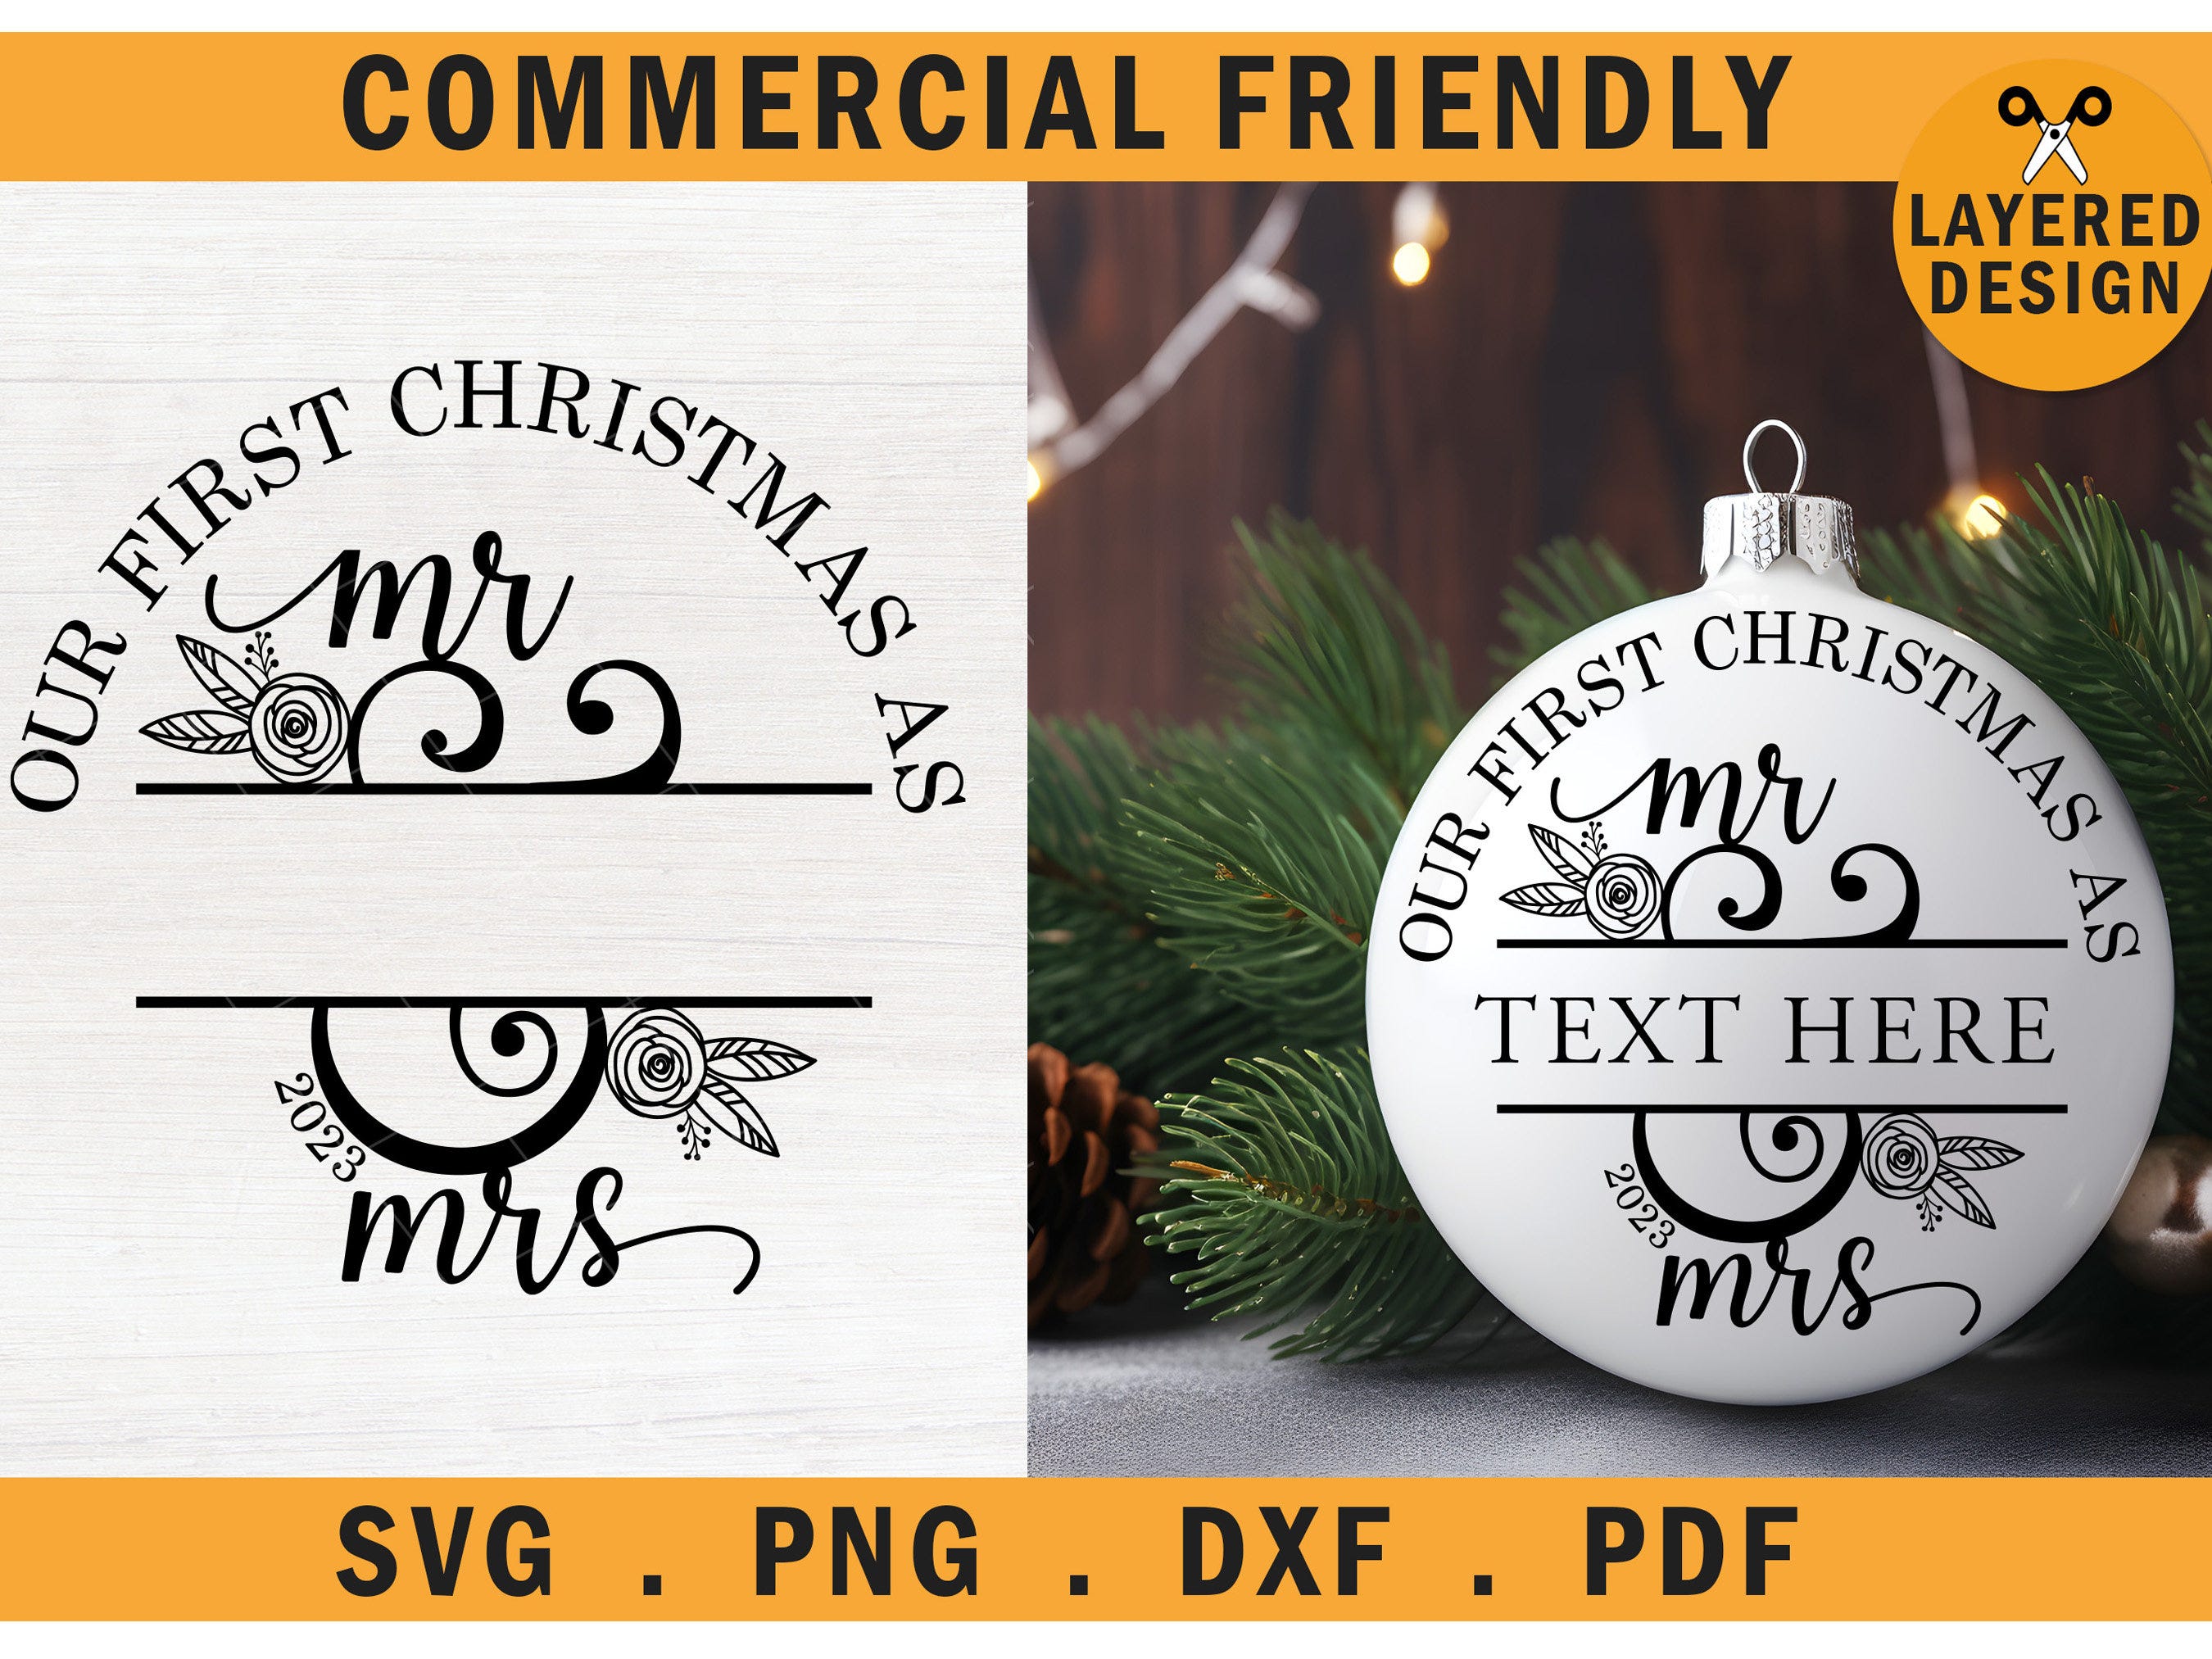 Our 1st mr and mrs Christmas bauble decal ornament,Our First mr and mrs Christmas,newlywed bauble gift,Wedding christmas gift SVG,PNG,DXF